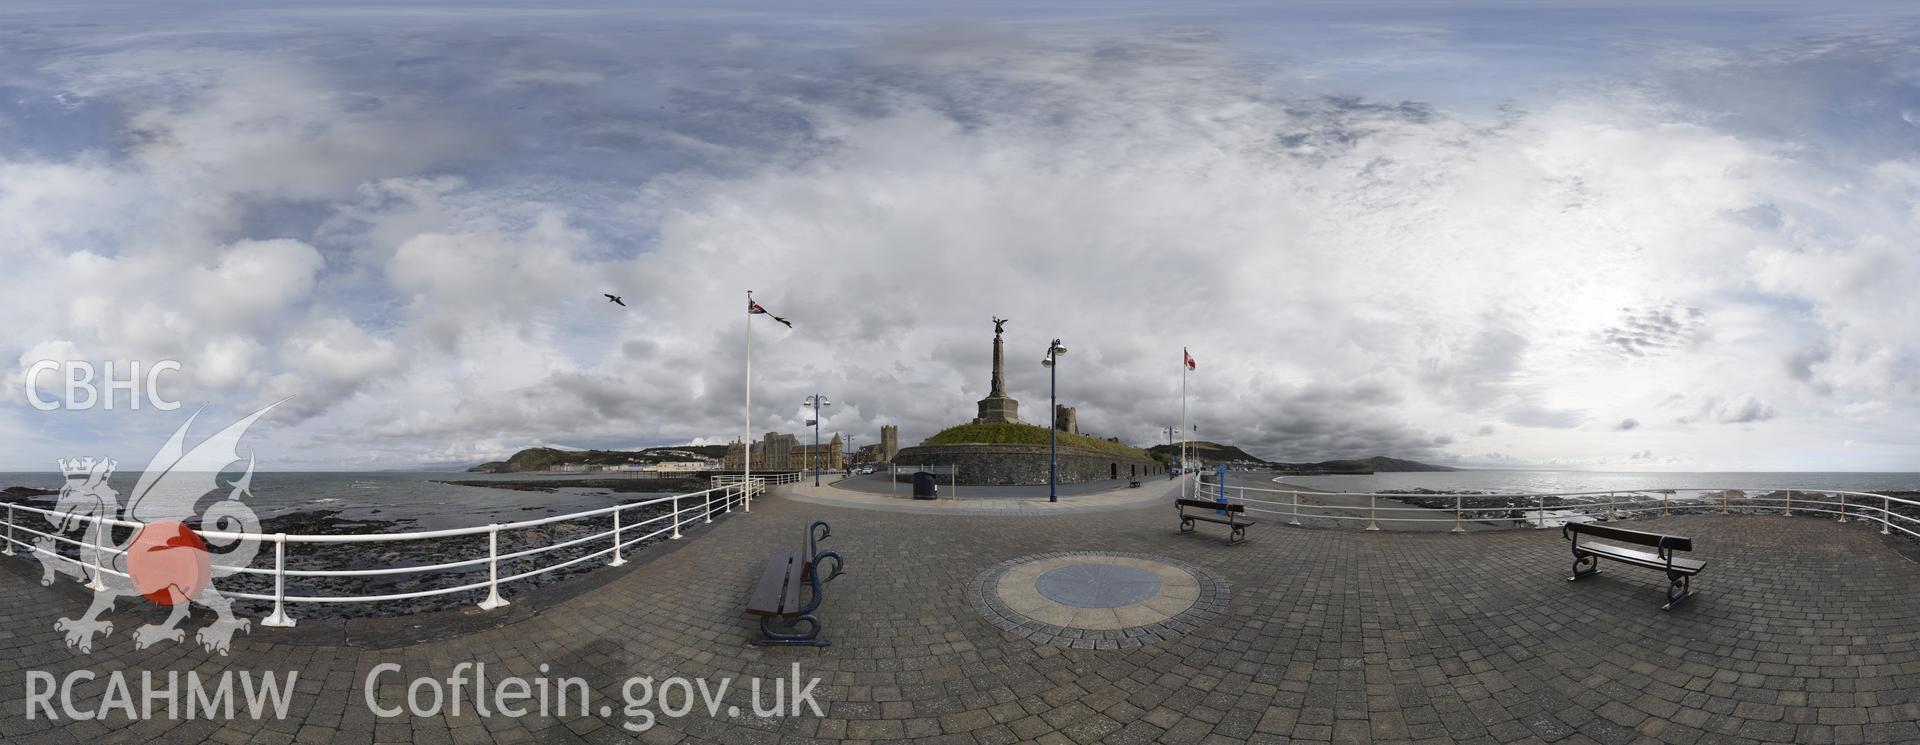 Reduced resolution tiff of stitched images of Promenade next to the War Memorial, Aberystwyth produced by Susan Fielding and Rita Singer, 2018. Produced through European Travellers to Wales project.